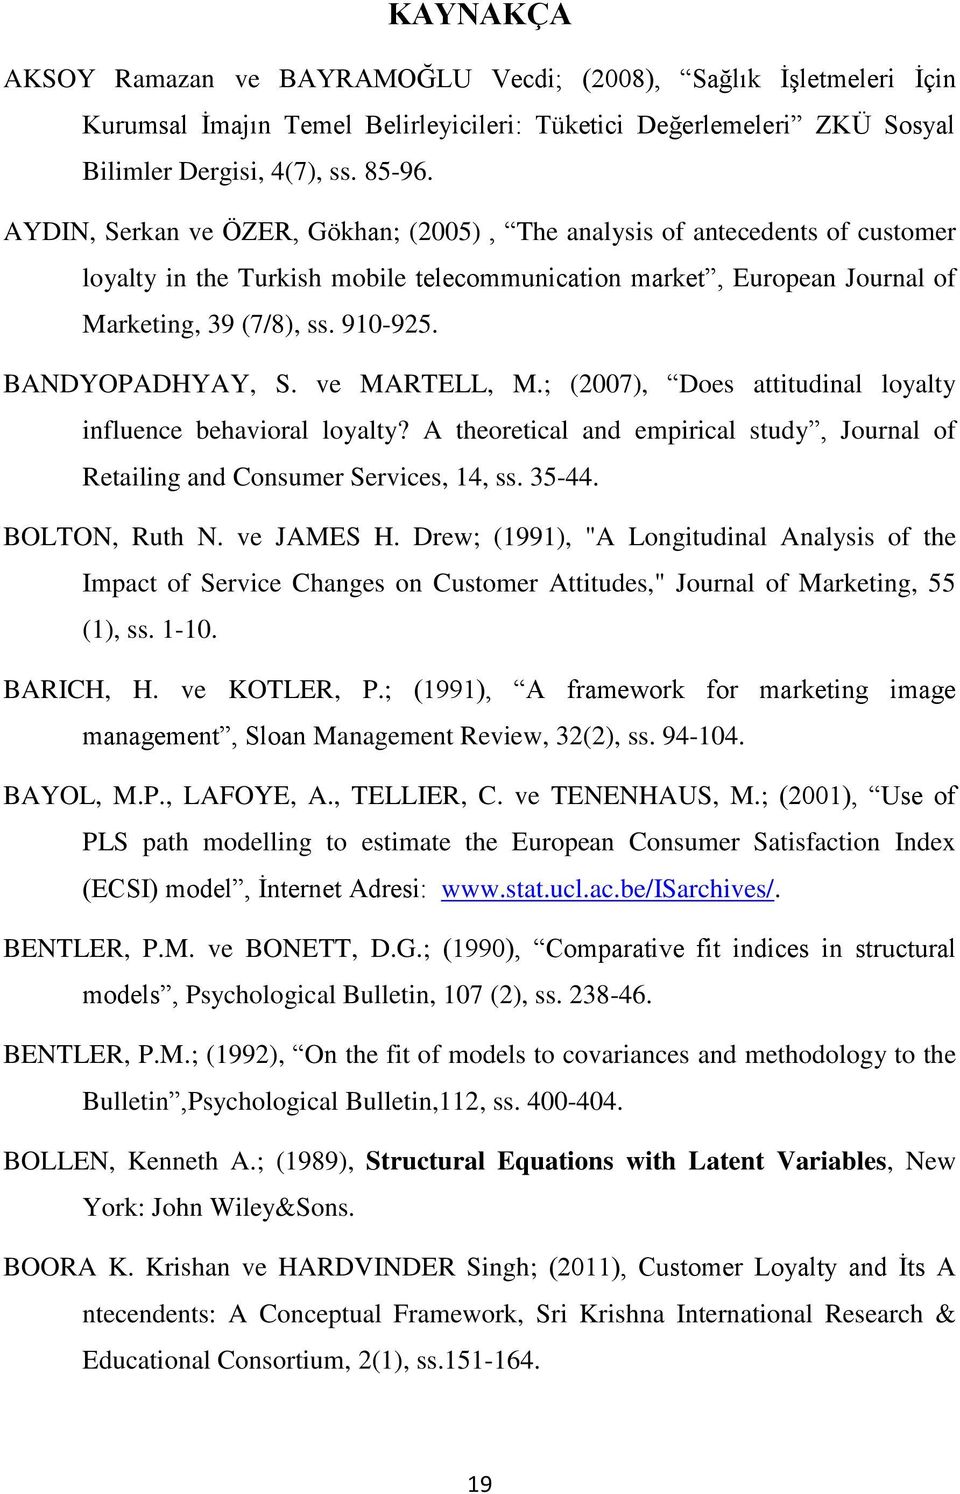 BANDYOPADHYAY, S. ve MARTELL, M.; (2007), Does attitudinal loyalty influence behavioral loyalty? A theoretical and empirical study, Journal of Retailing and Consumer Services, 14, ss. 35-44.